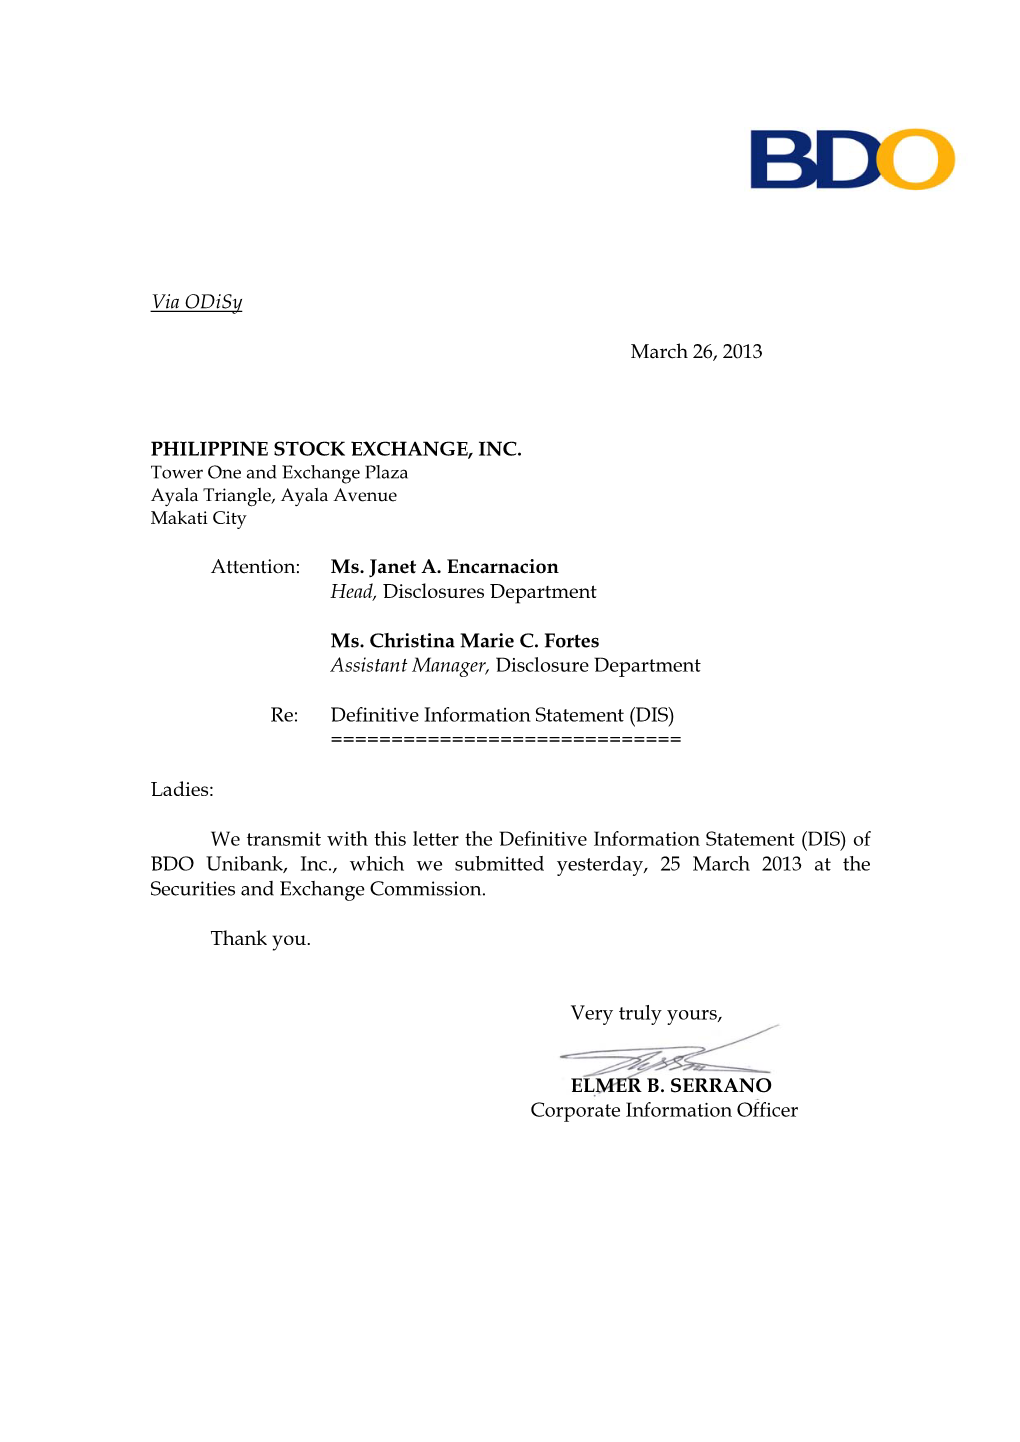 Information Statement for 2013 Annual Stockholders Meeting